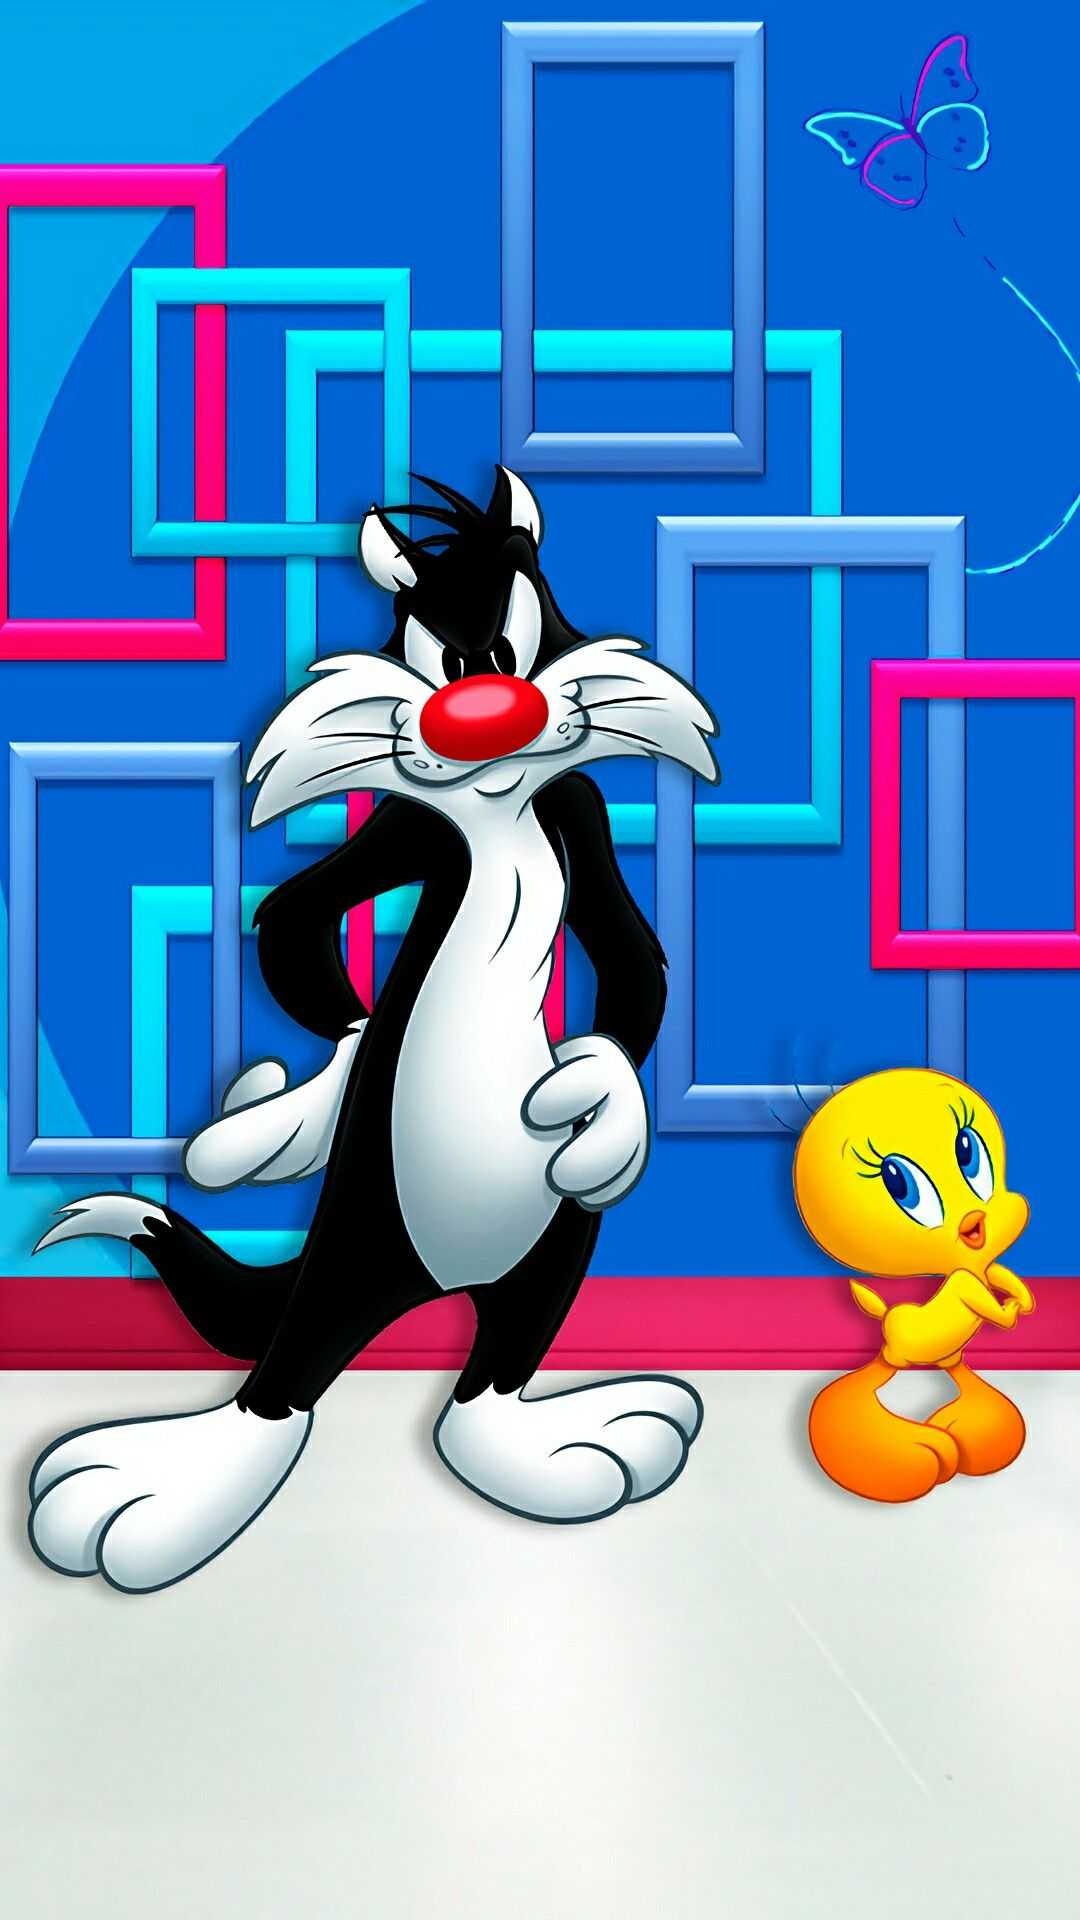 HD wallpaper, Sylvester Wallpaper, Artistic Portrayal, Mobile 1080P Sylvester The Cat Background Photo, 1080X1920 Full Hd Phone